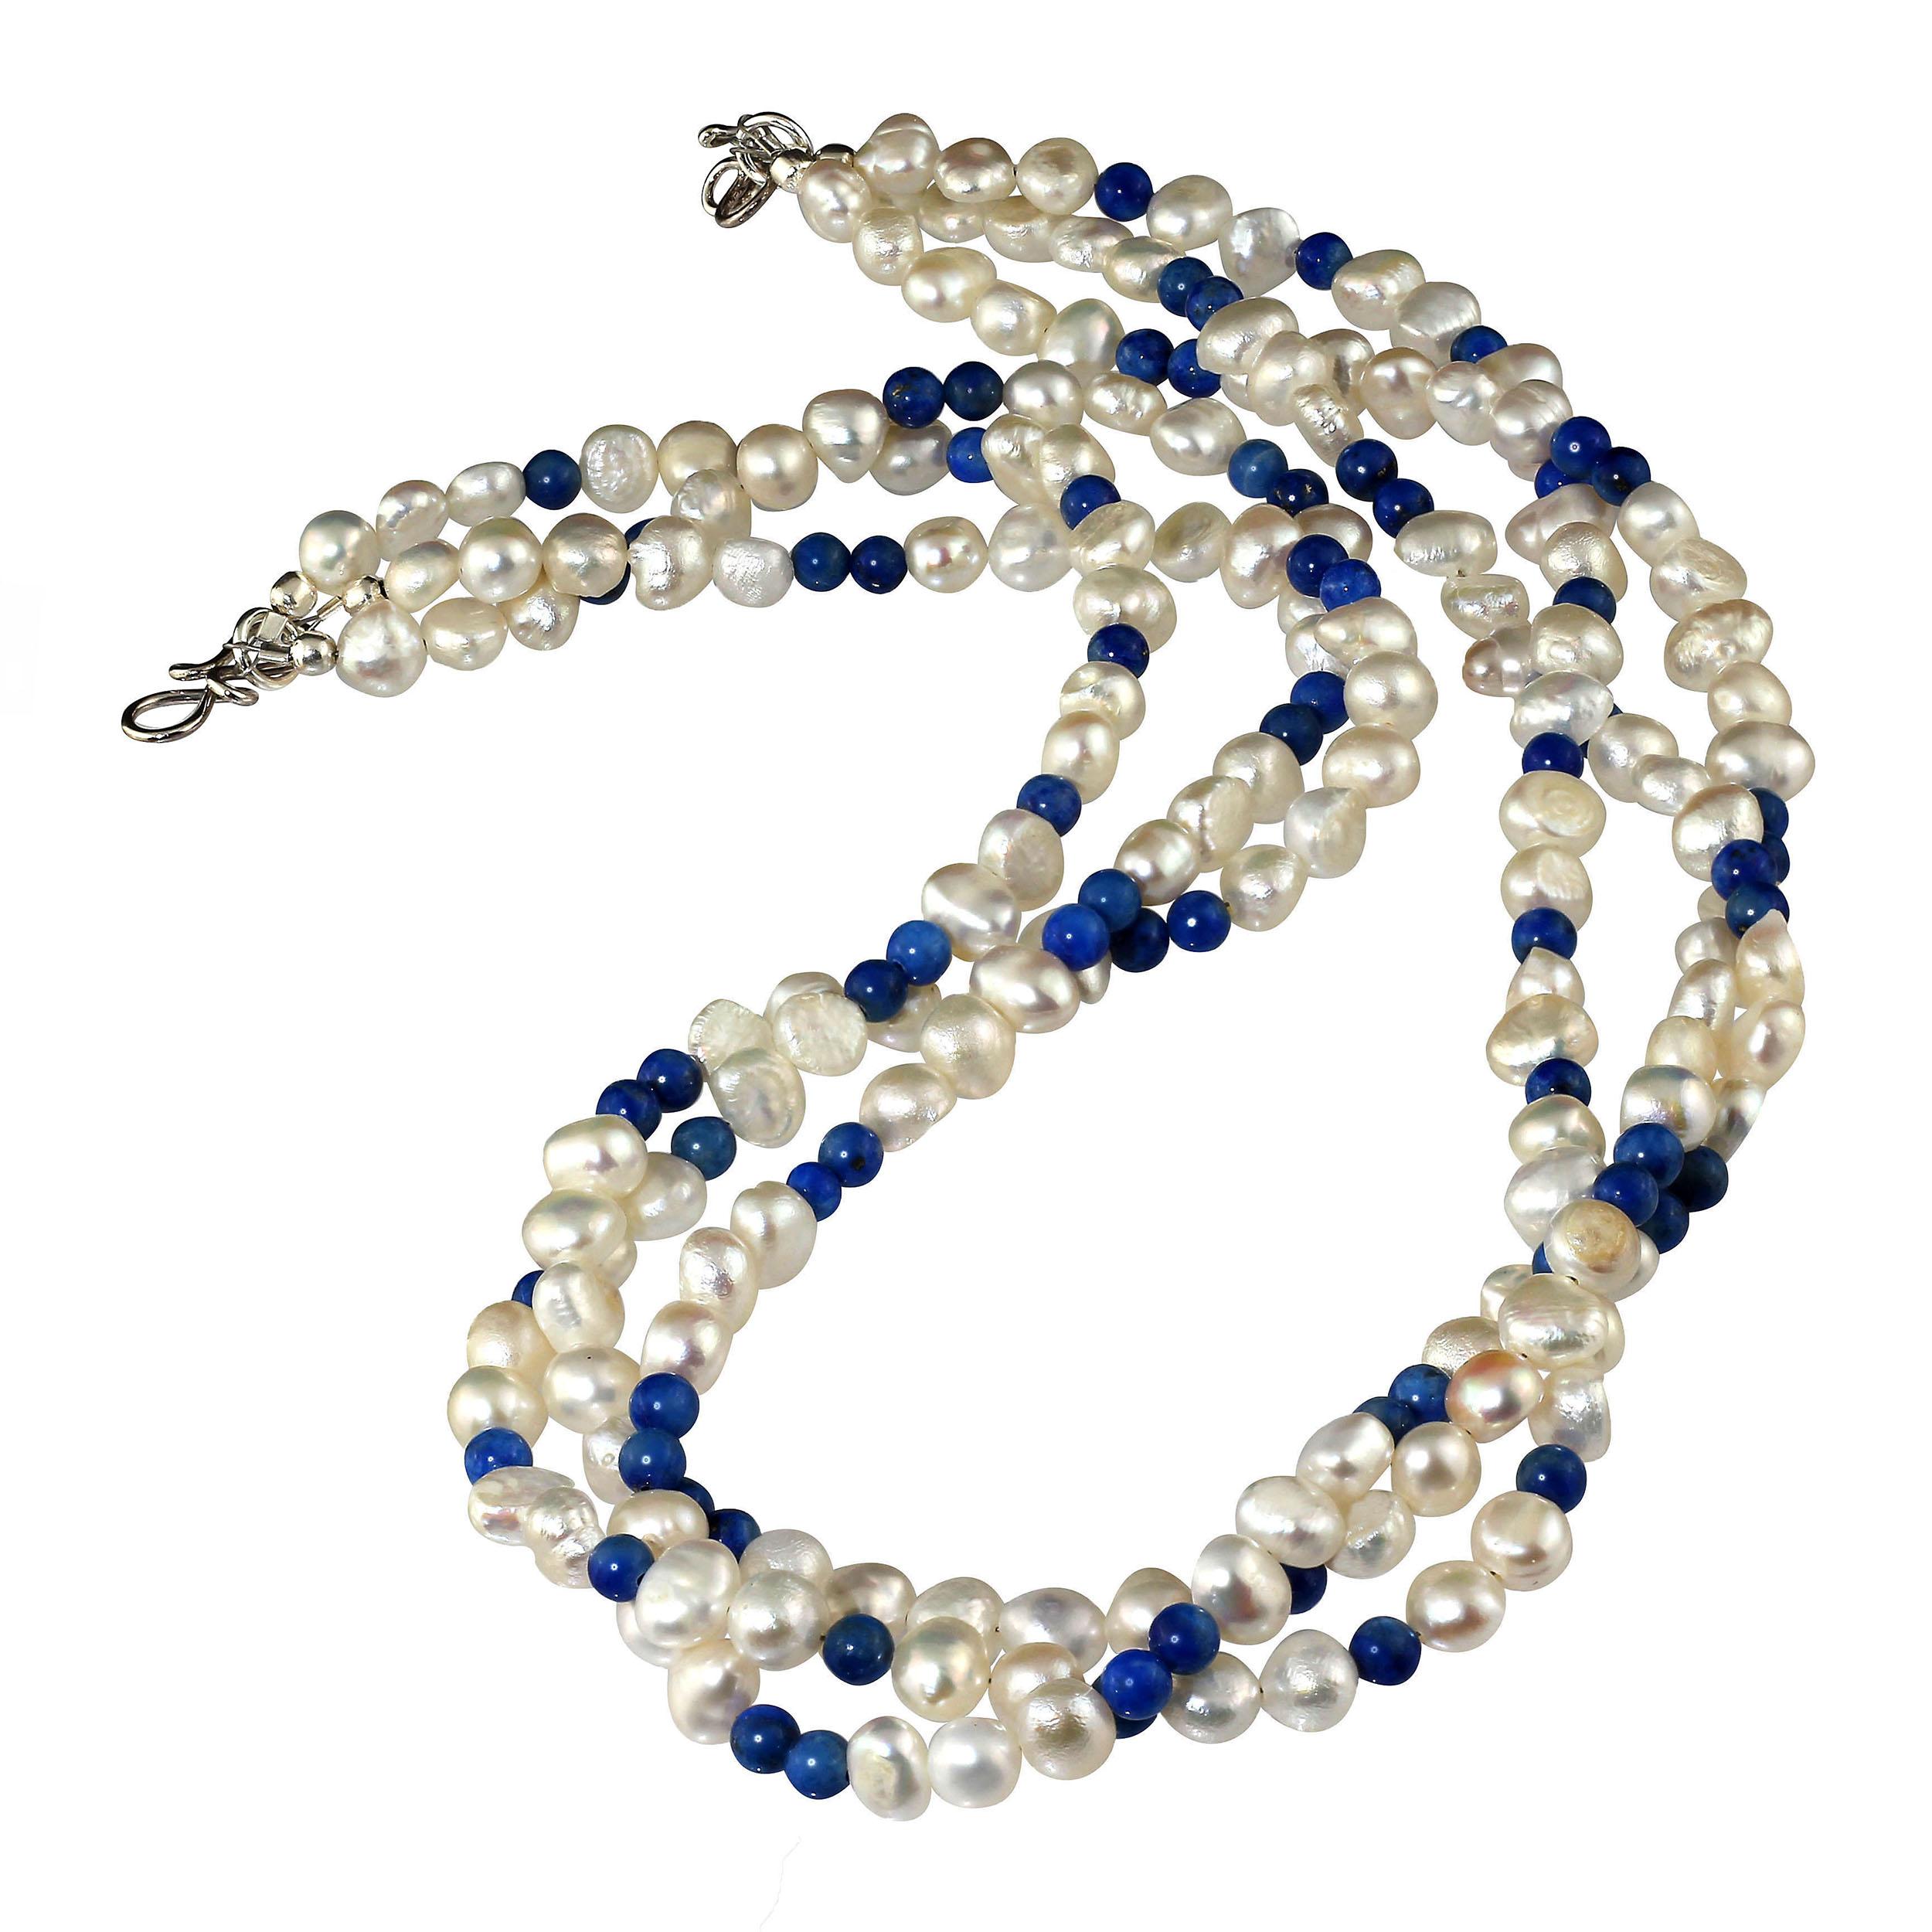 Bead AJD Three-Strand 17 Inch  Necklace  White Pearls and Lapis Lazuli   Great Gift!!